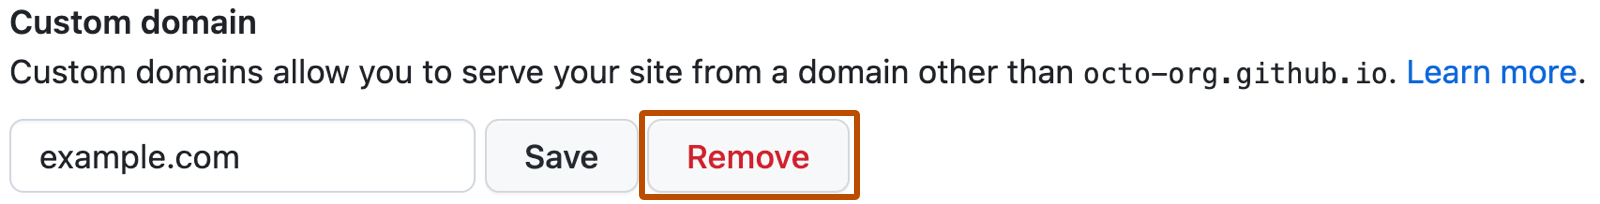 Screenshot of a settings box to save or remove a custom domain on GitHub Pages . To the right of a text box reading "example.com" is a button labeled "Remove" in red type.